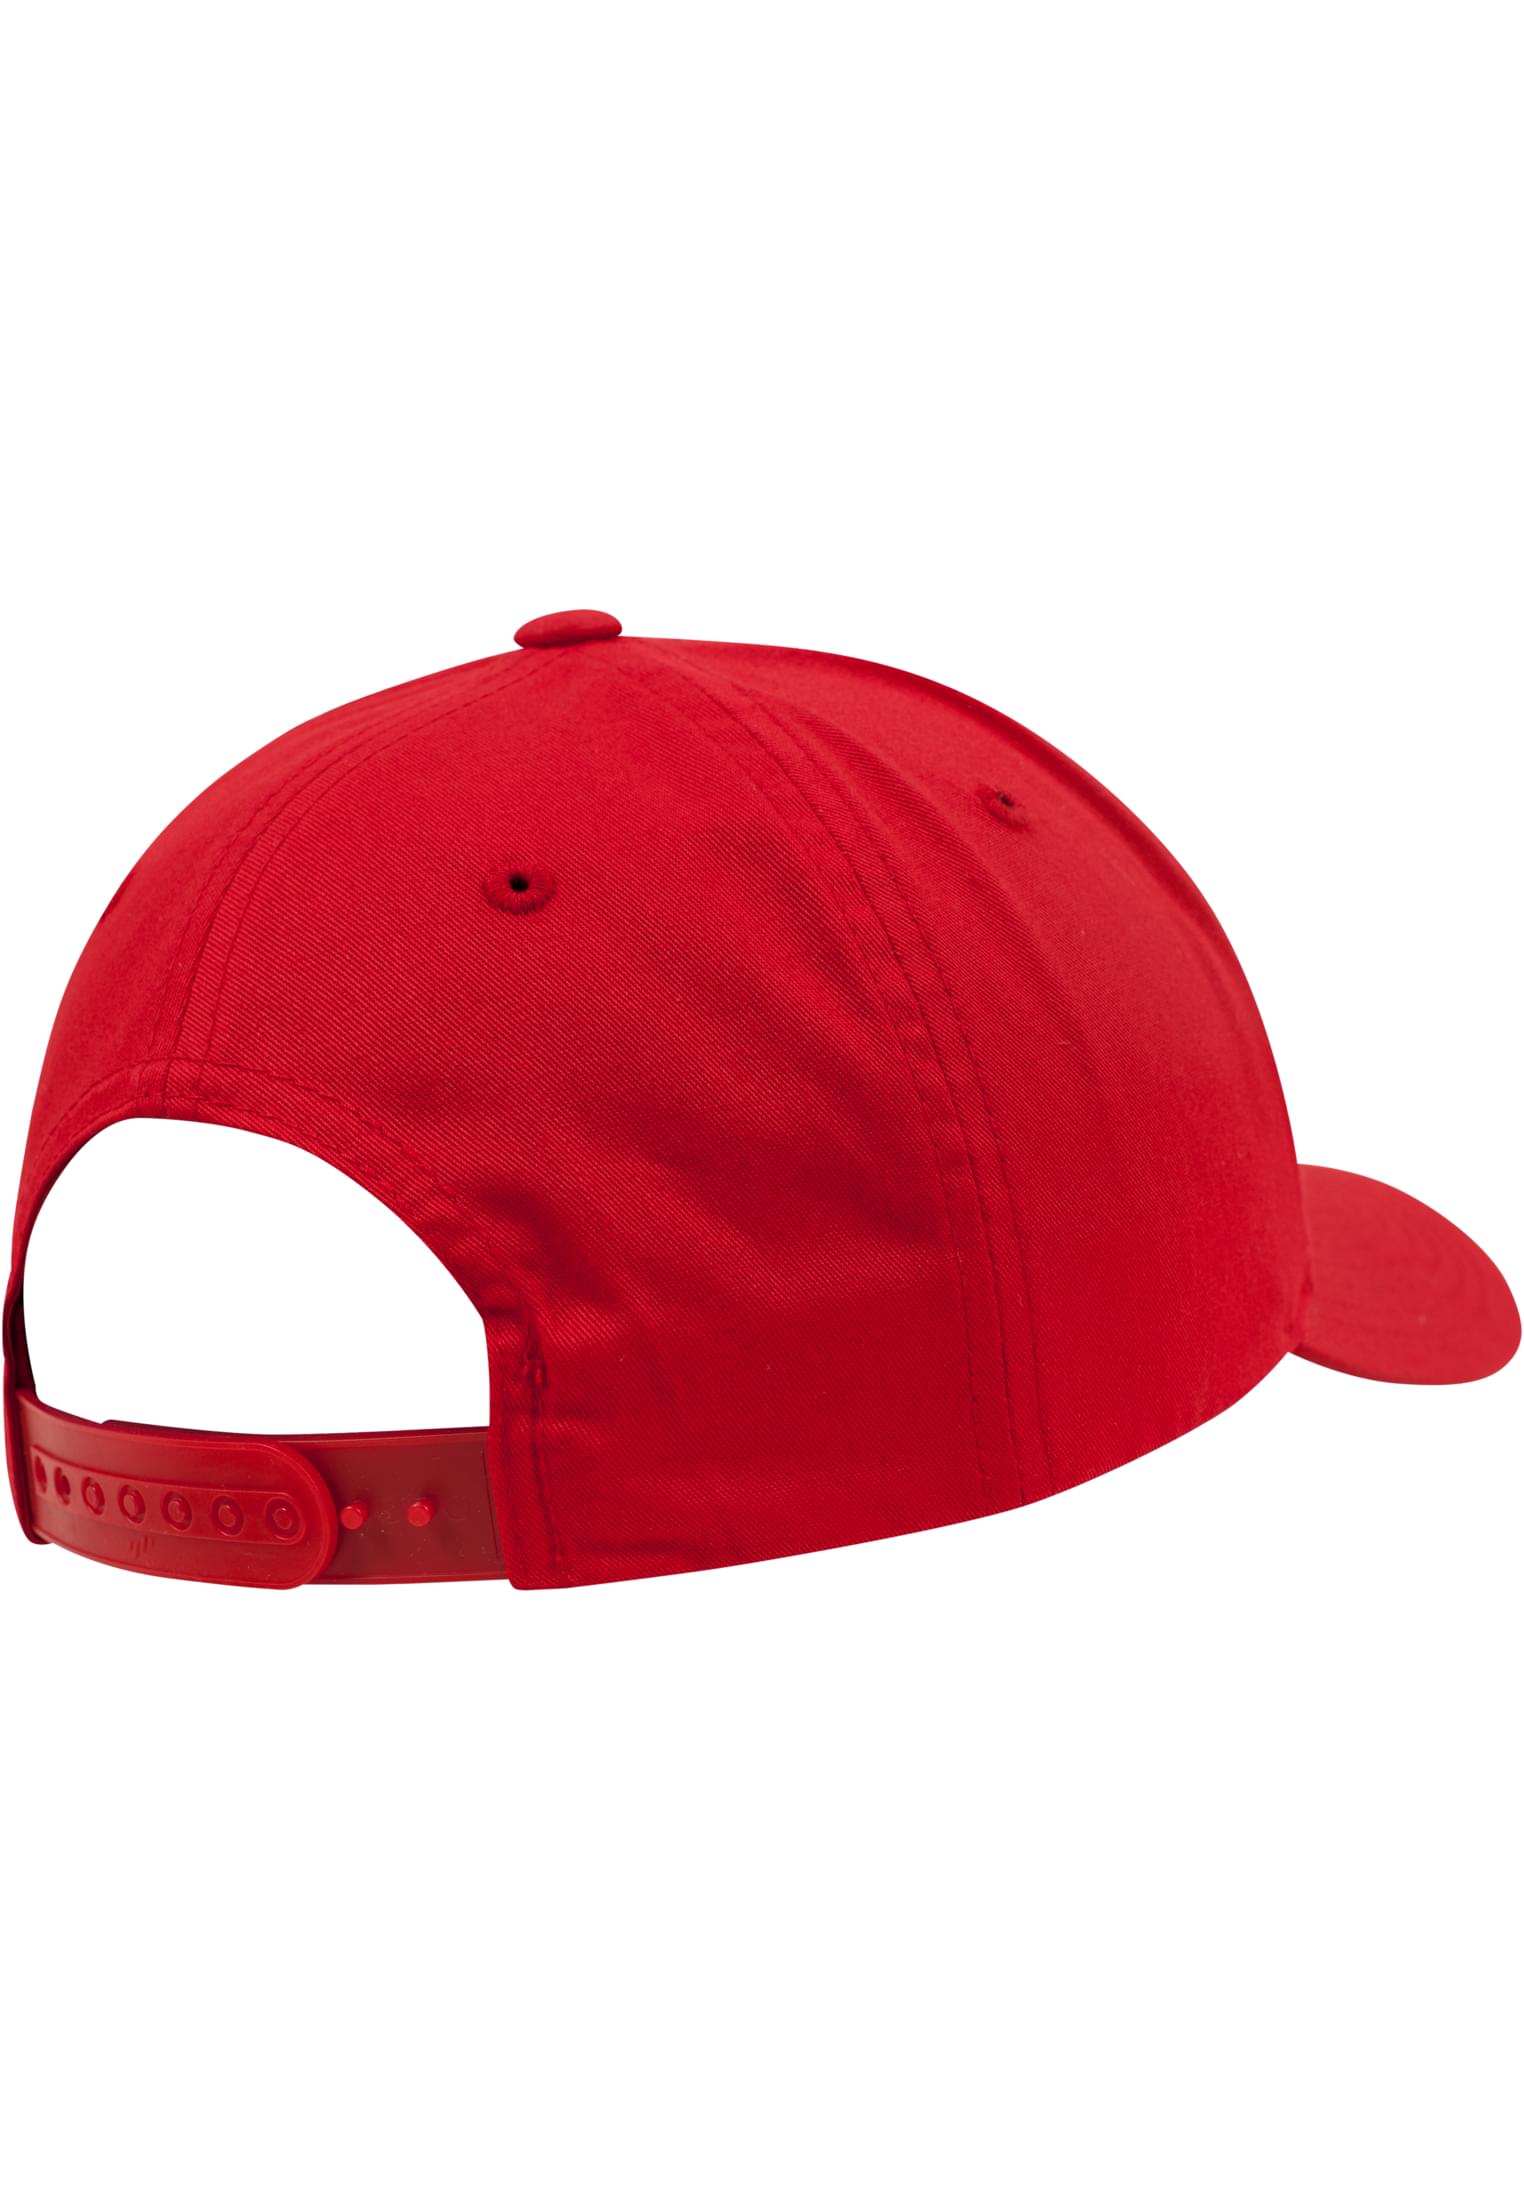 Snapback Curved Classic Snapback in Farbe red